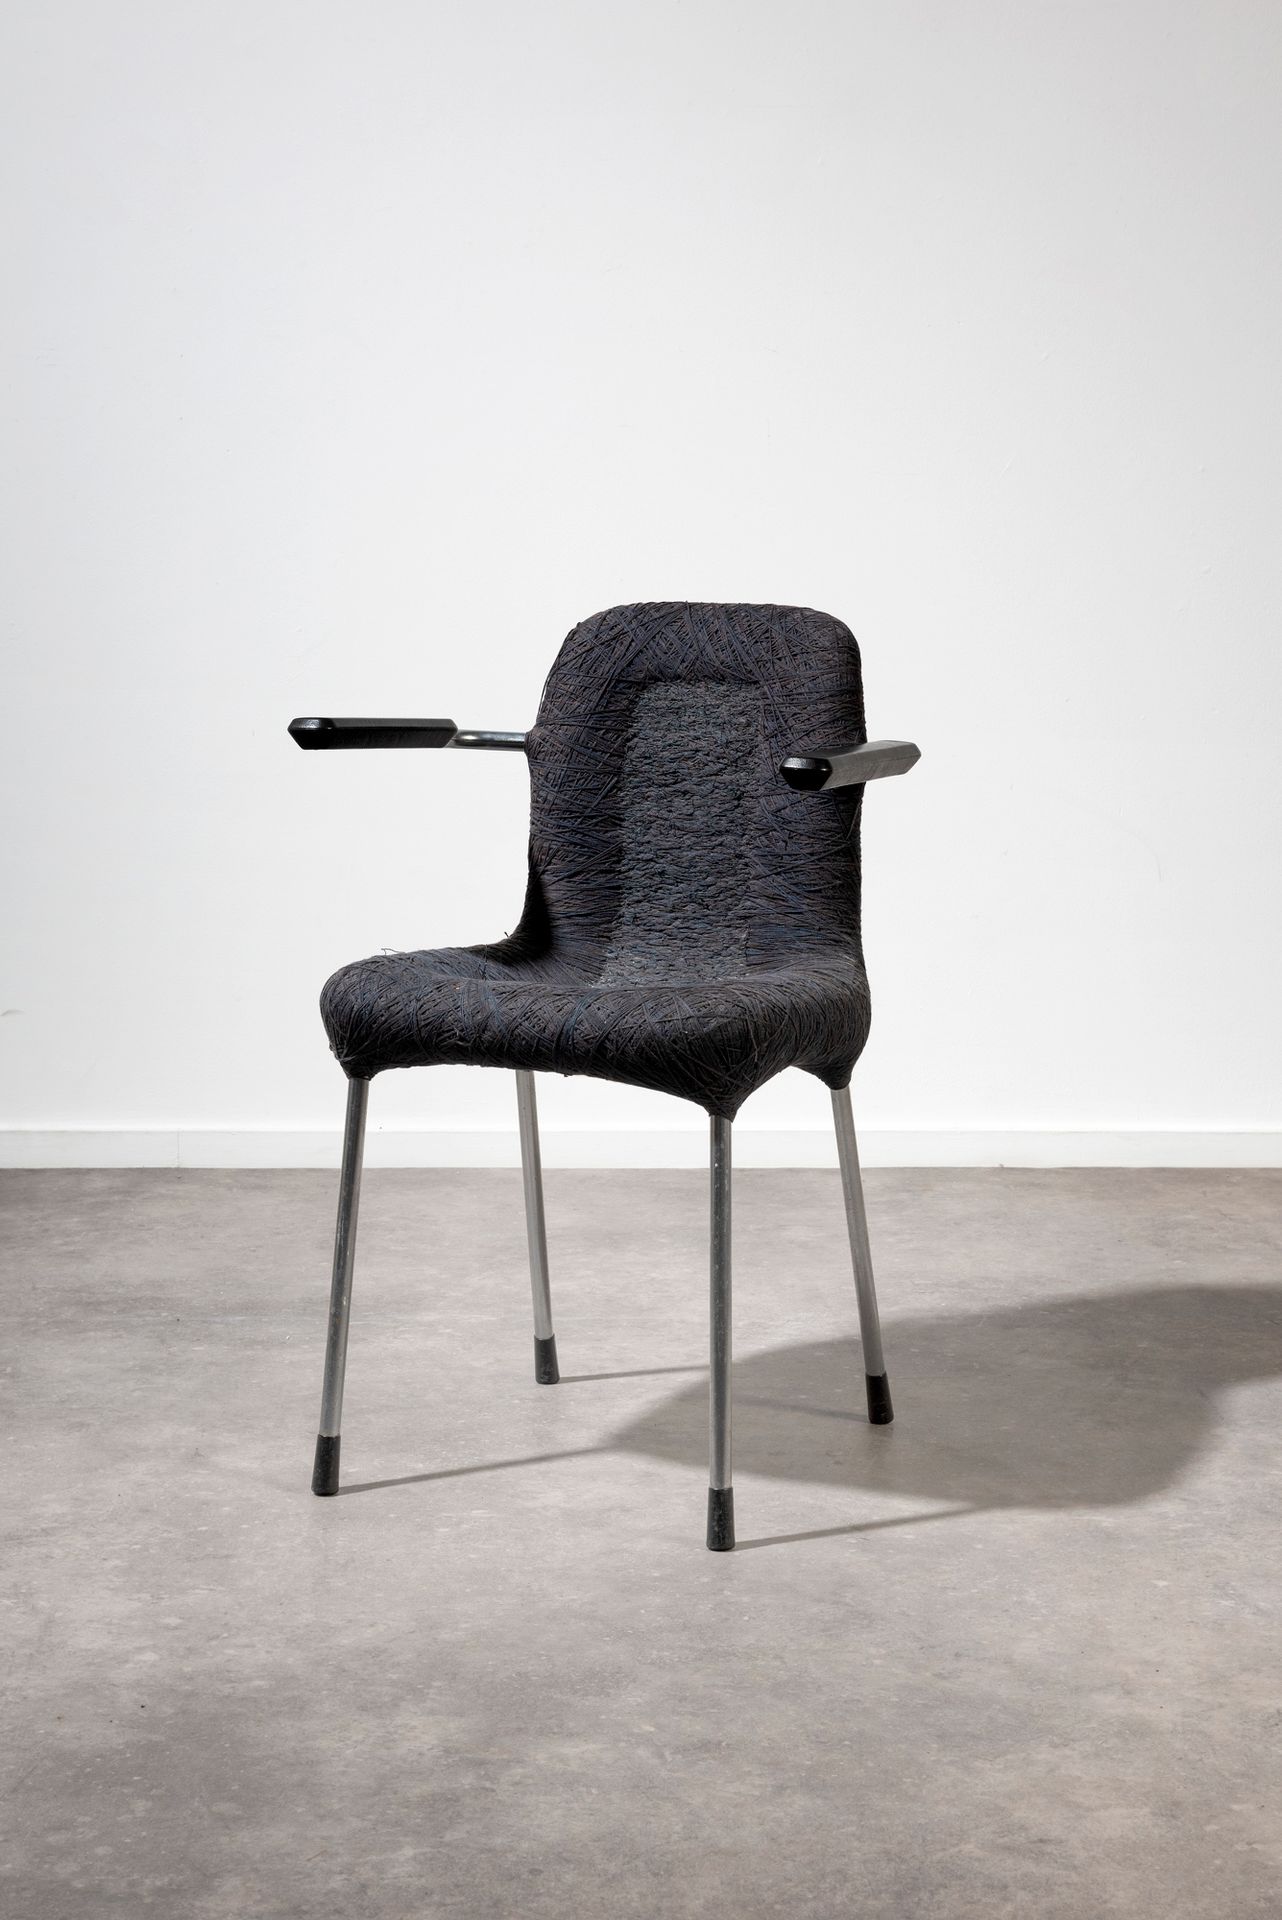 Ball chair. Armchair. Steel structure, seat and backrest…